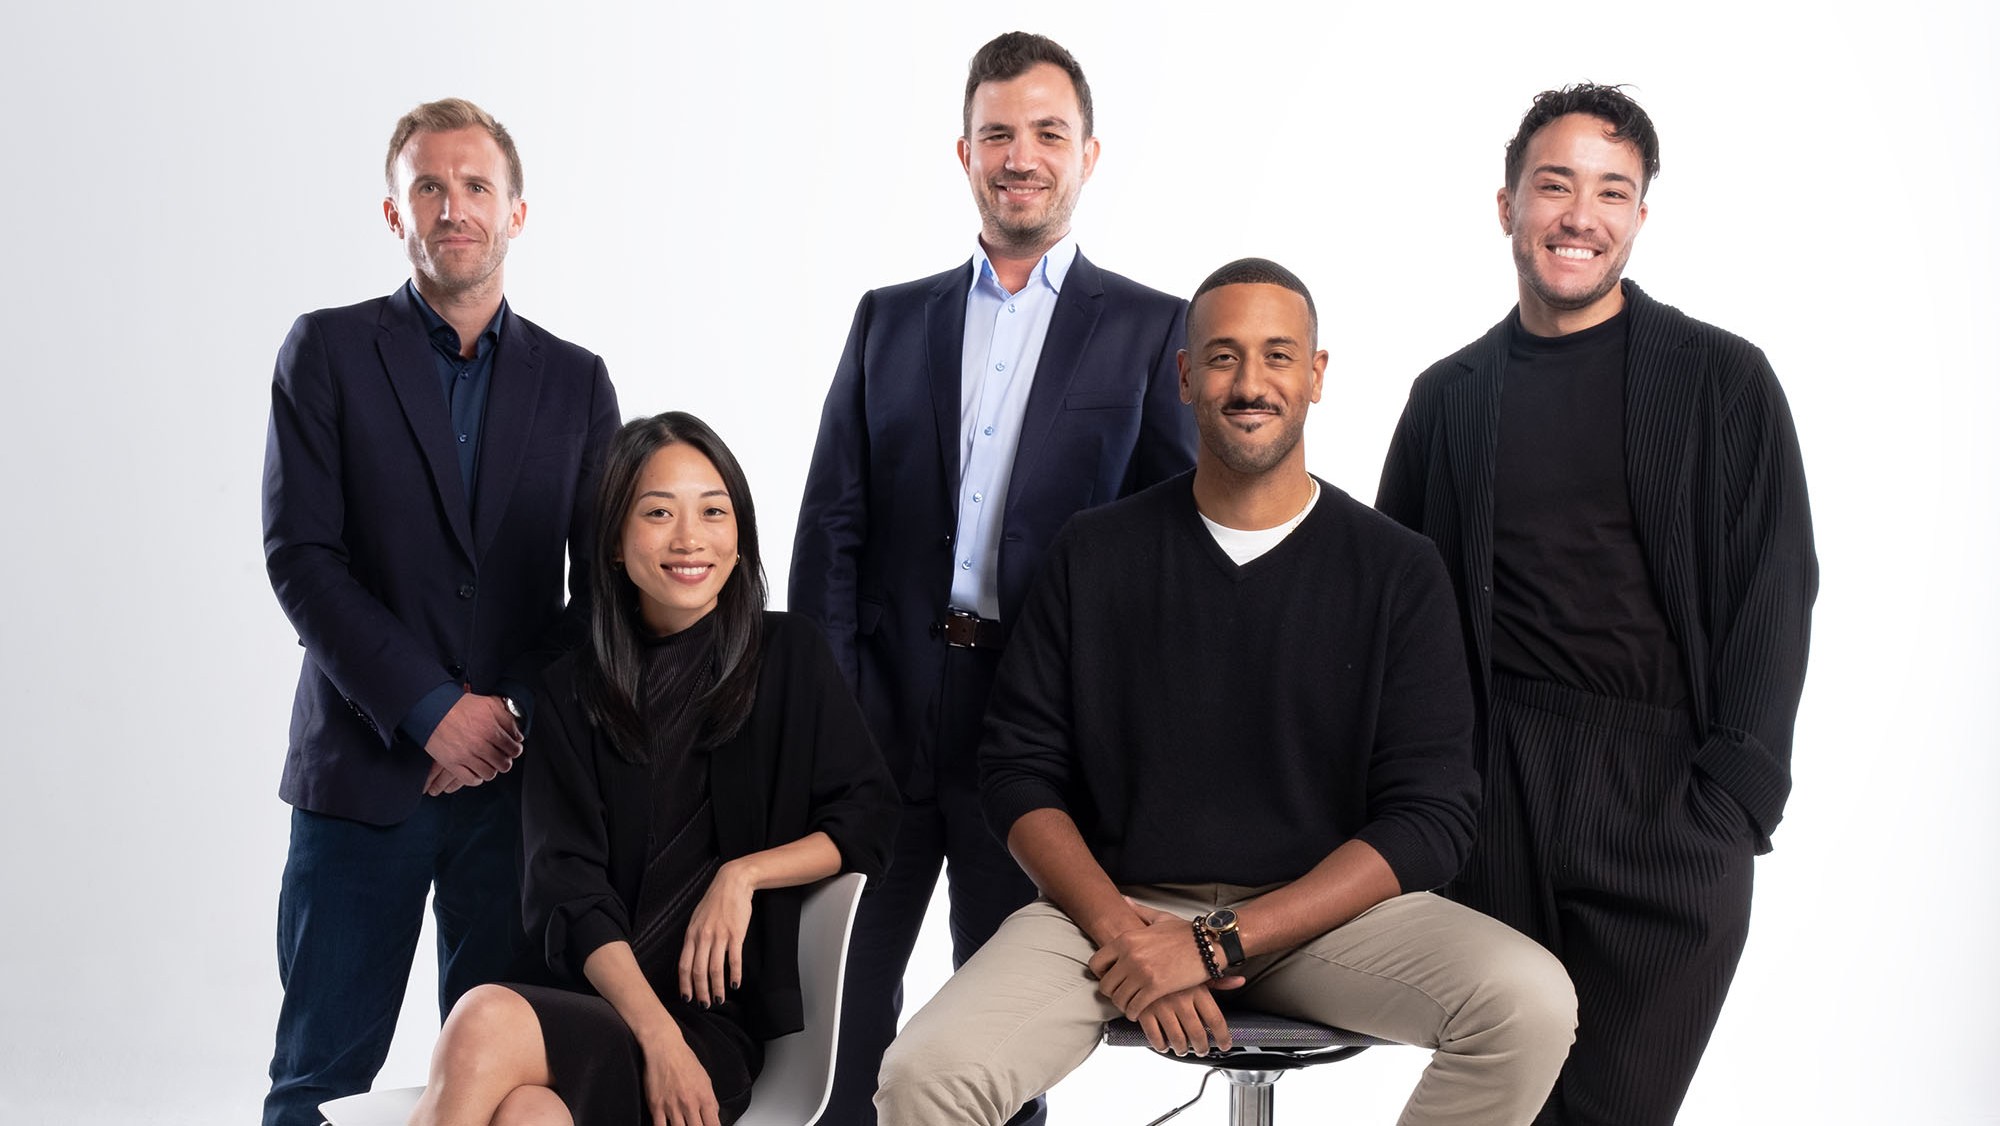 From left New Regency’s Sam Hanson, Kindred Spirit founder Anita Gou, CAA’s Adam Friedman, A24 exec Zach Vargas-Sullivan and UTA agent Houston Costa. Executives throughout were photographed Oct. 30 and Nov. 3 at PMC Studios in L.A.